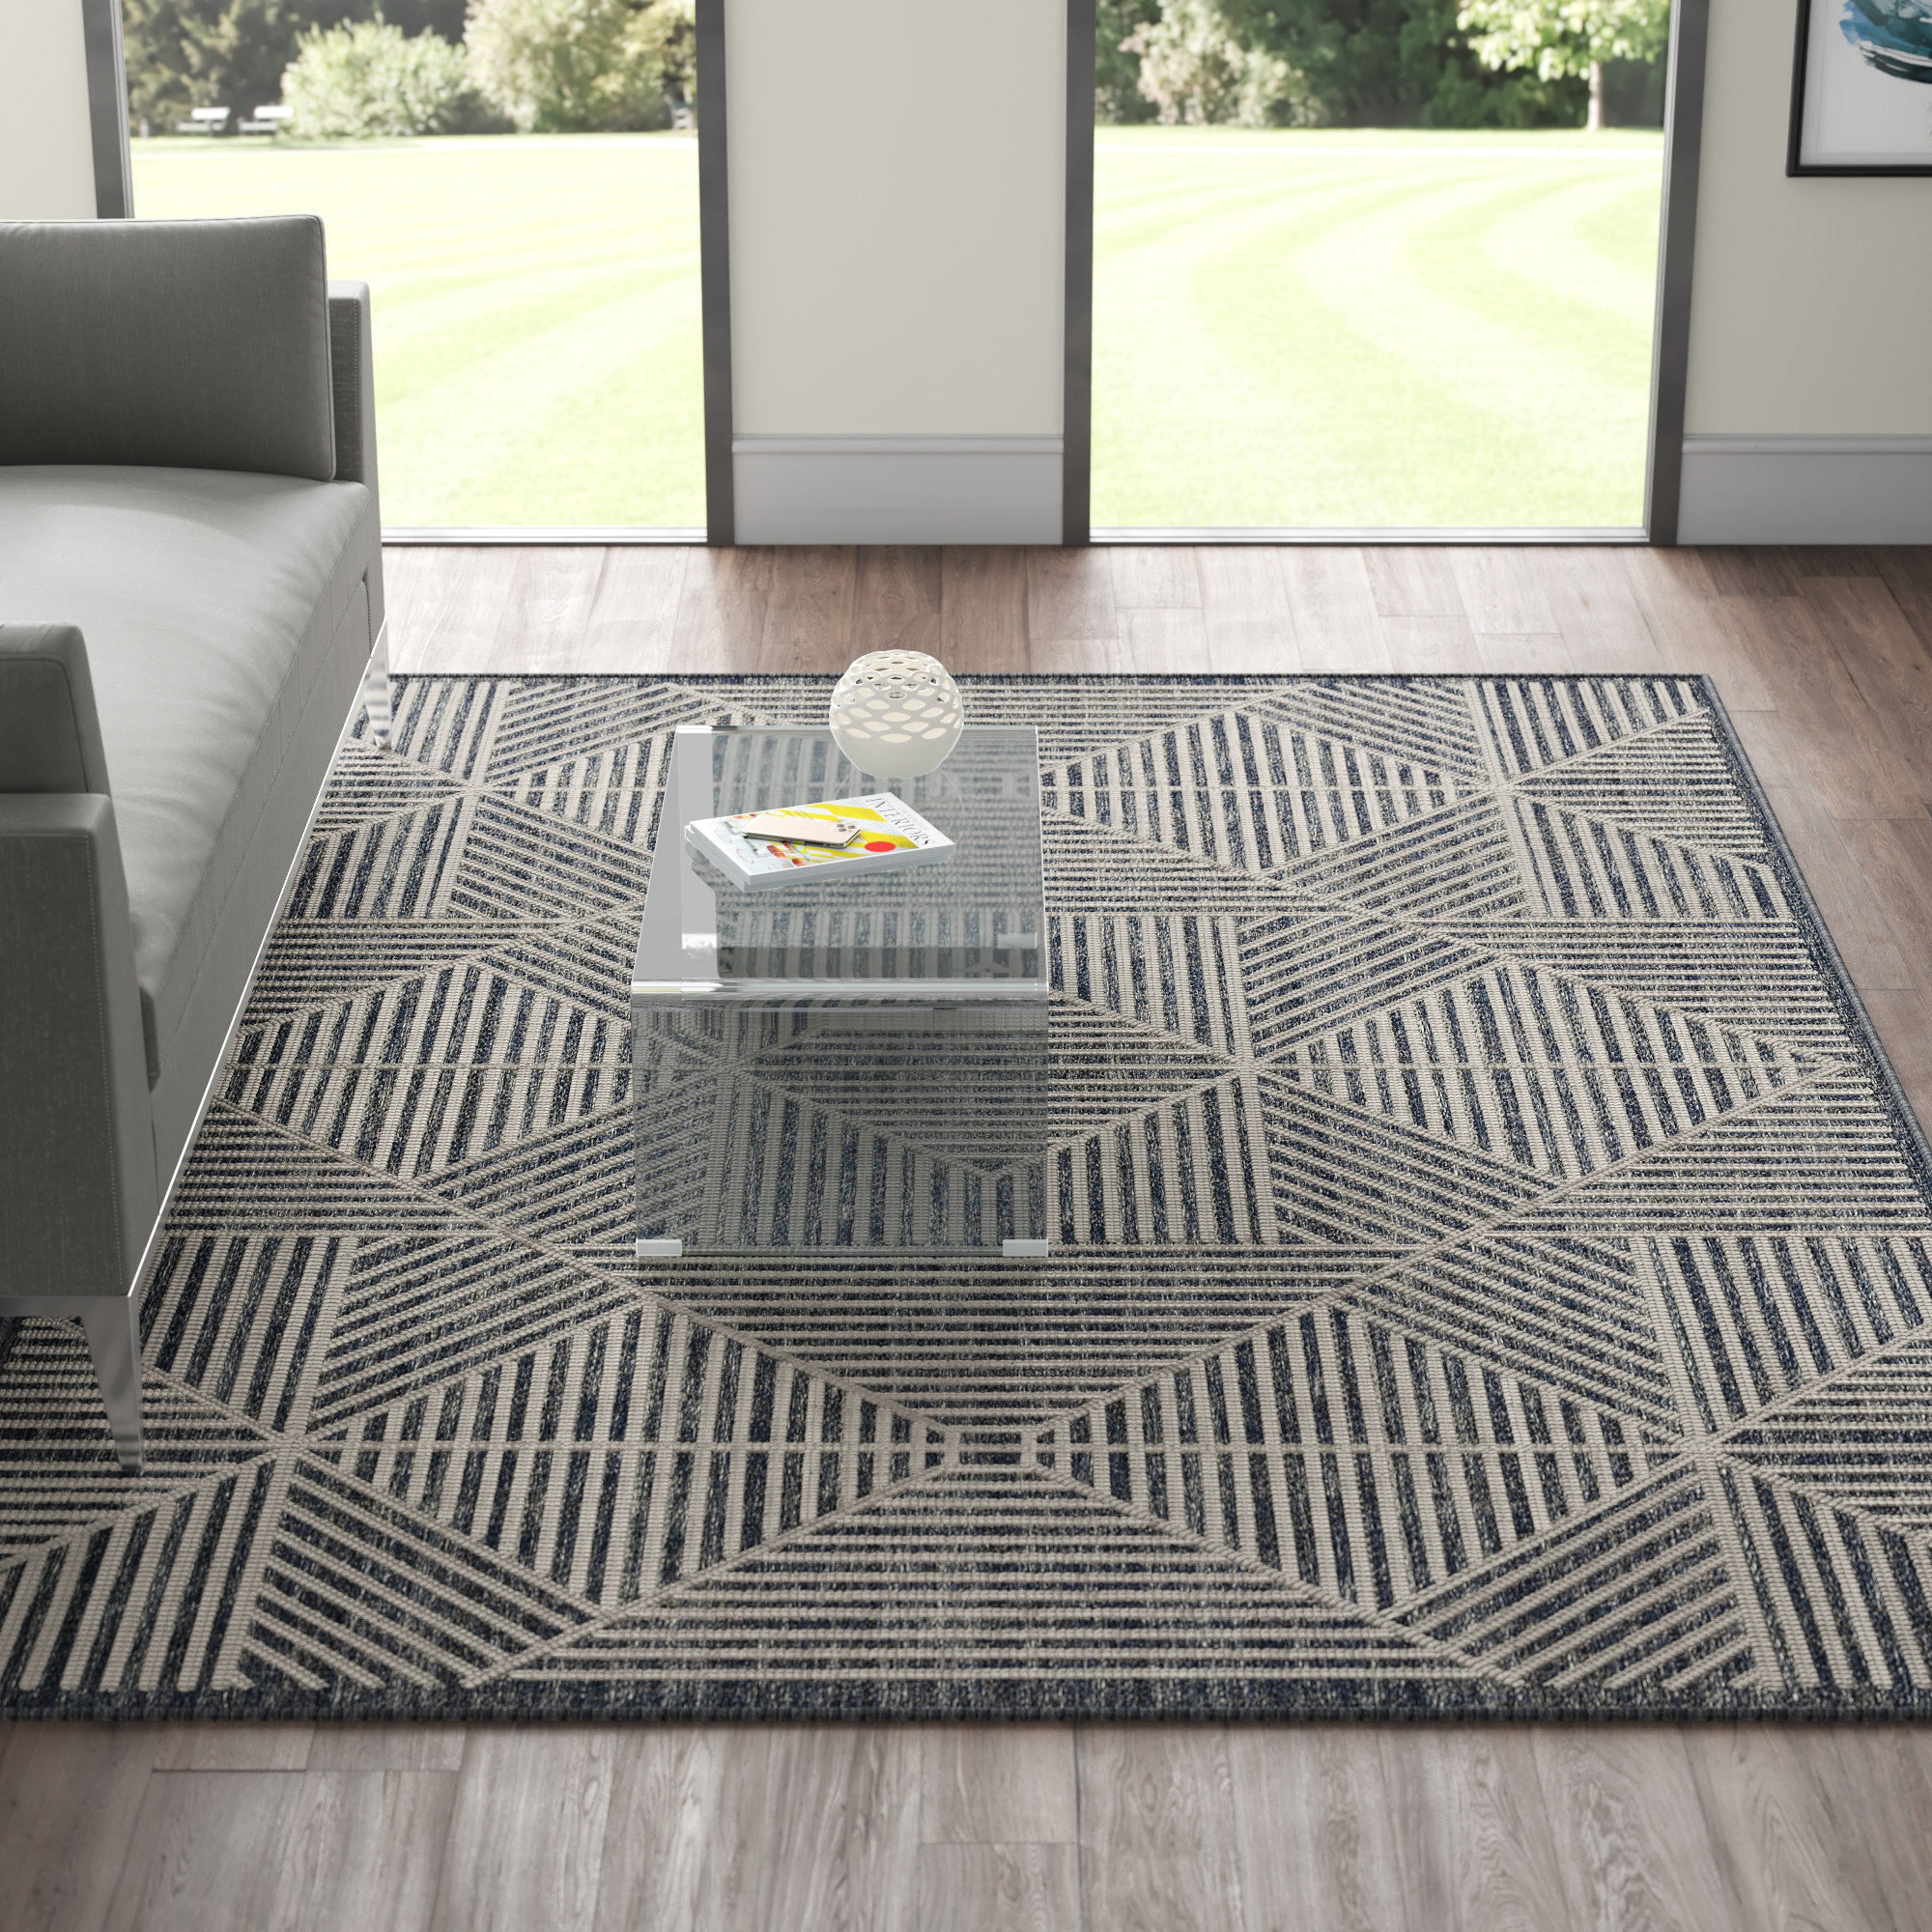 Zahir Tropical Floral Indoor/Outdoor Area Rug Cream/Gray/Black Beachcrest Home Rug Size: Rectangle 5' x 7